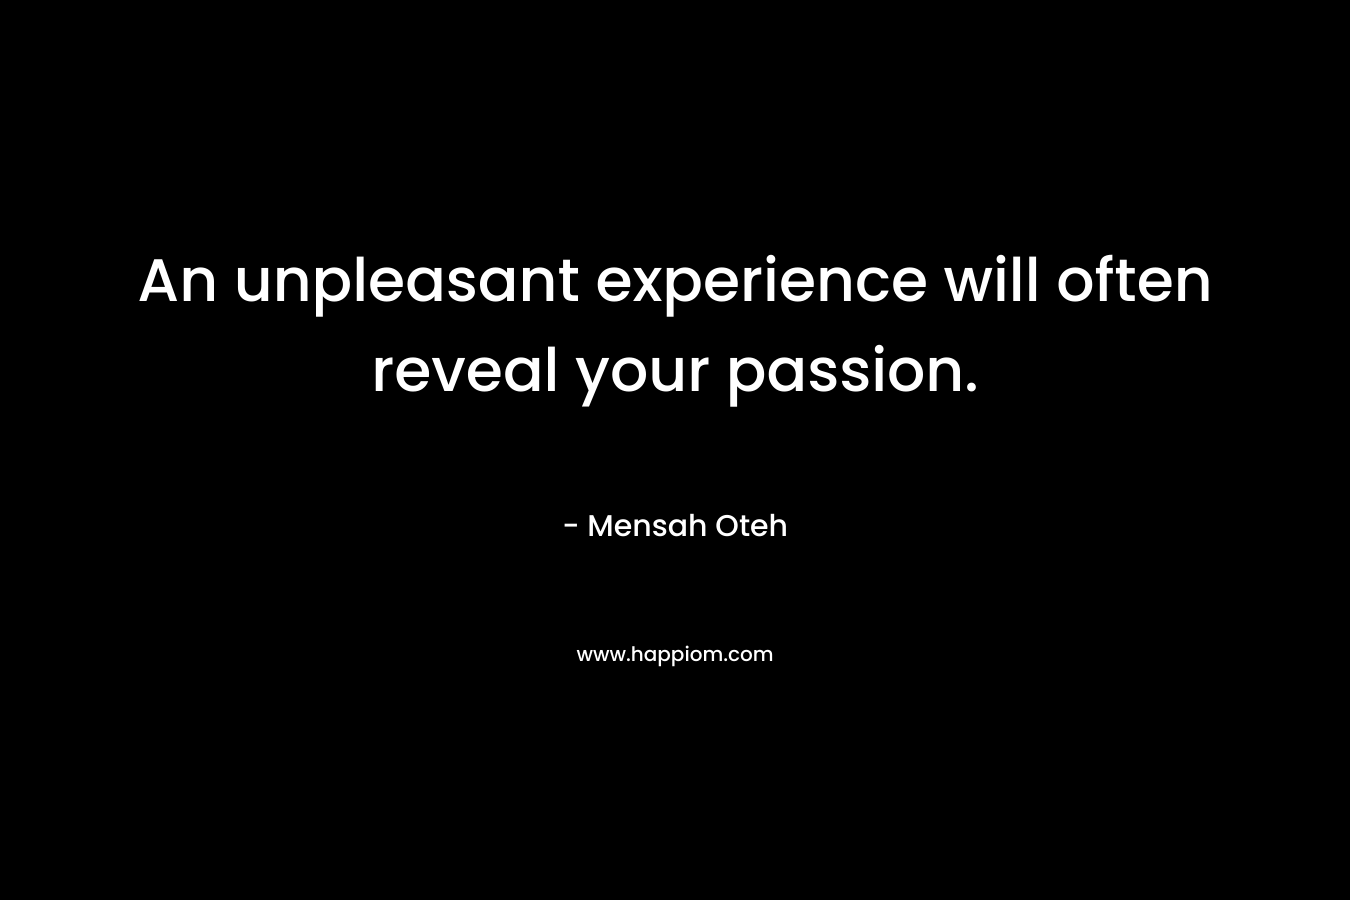 An unpleasant experience will often reveal your passion.